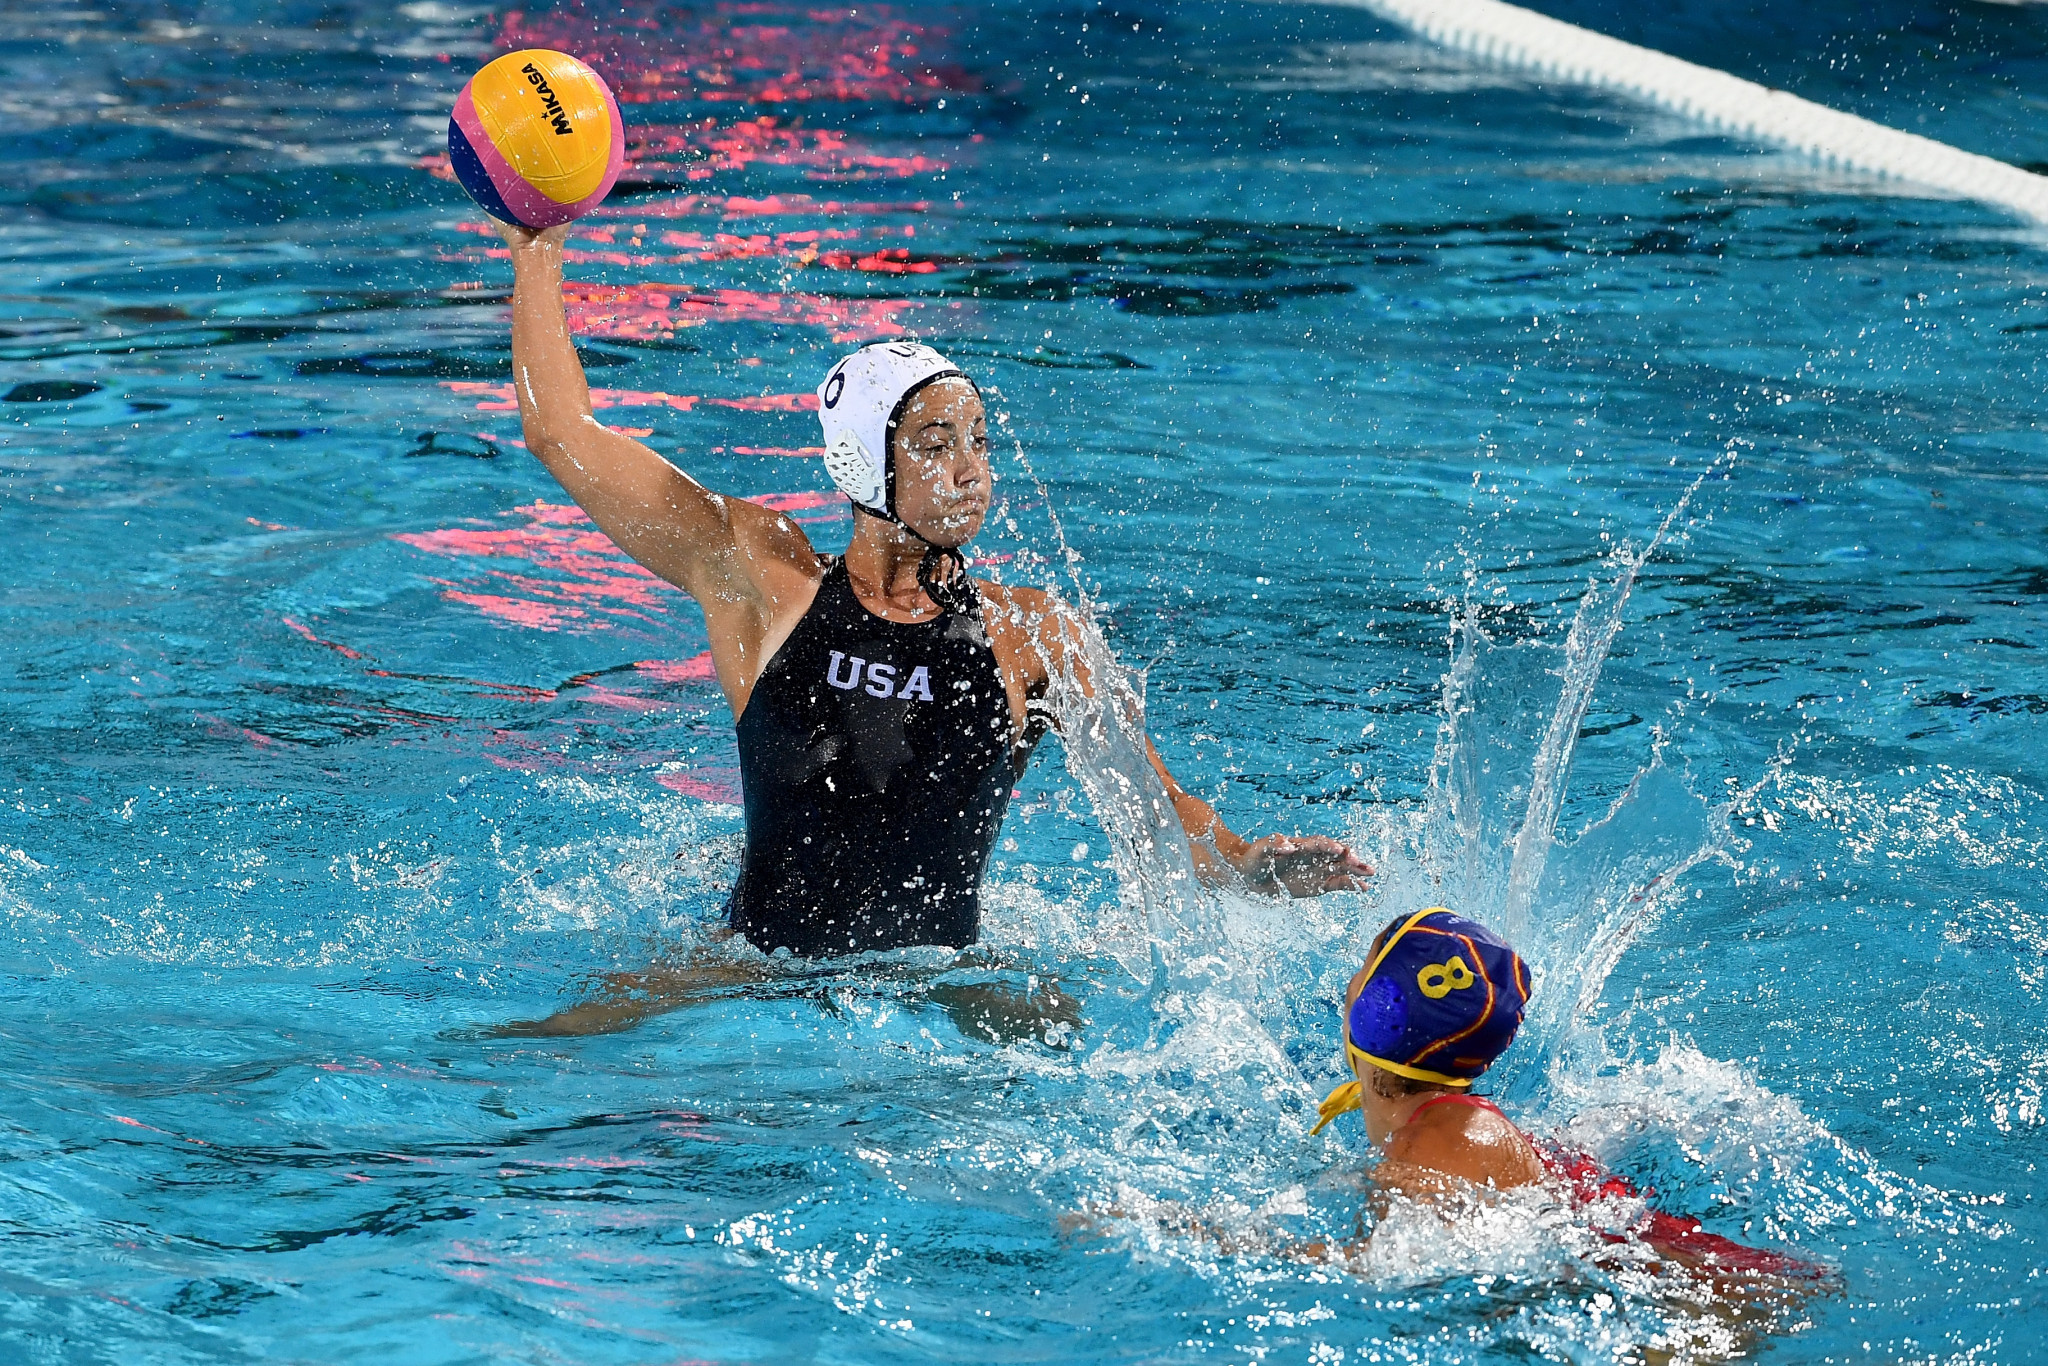 United States clinch third straight win at FINA Women's Water Polo World League Super Final